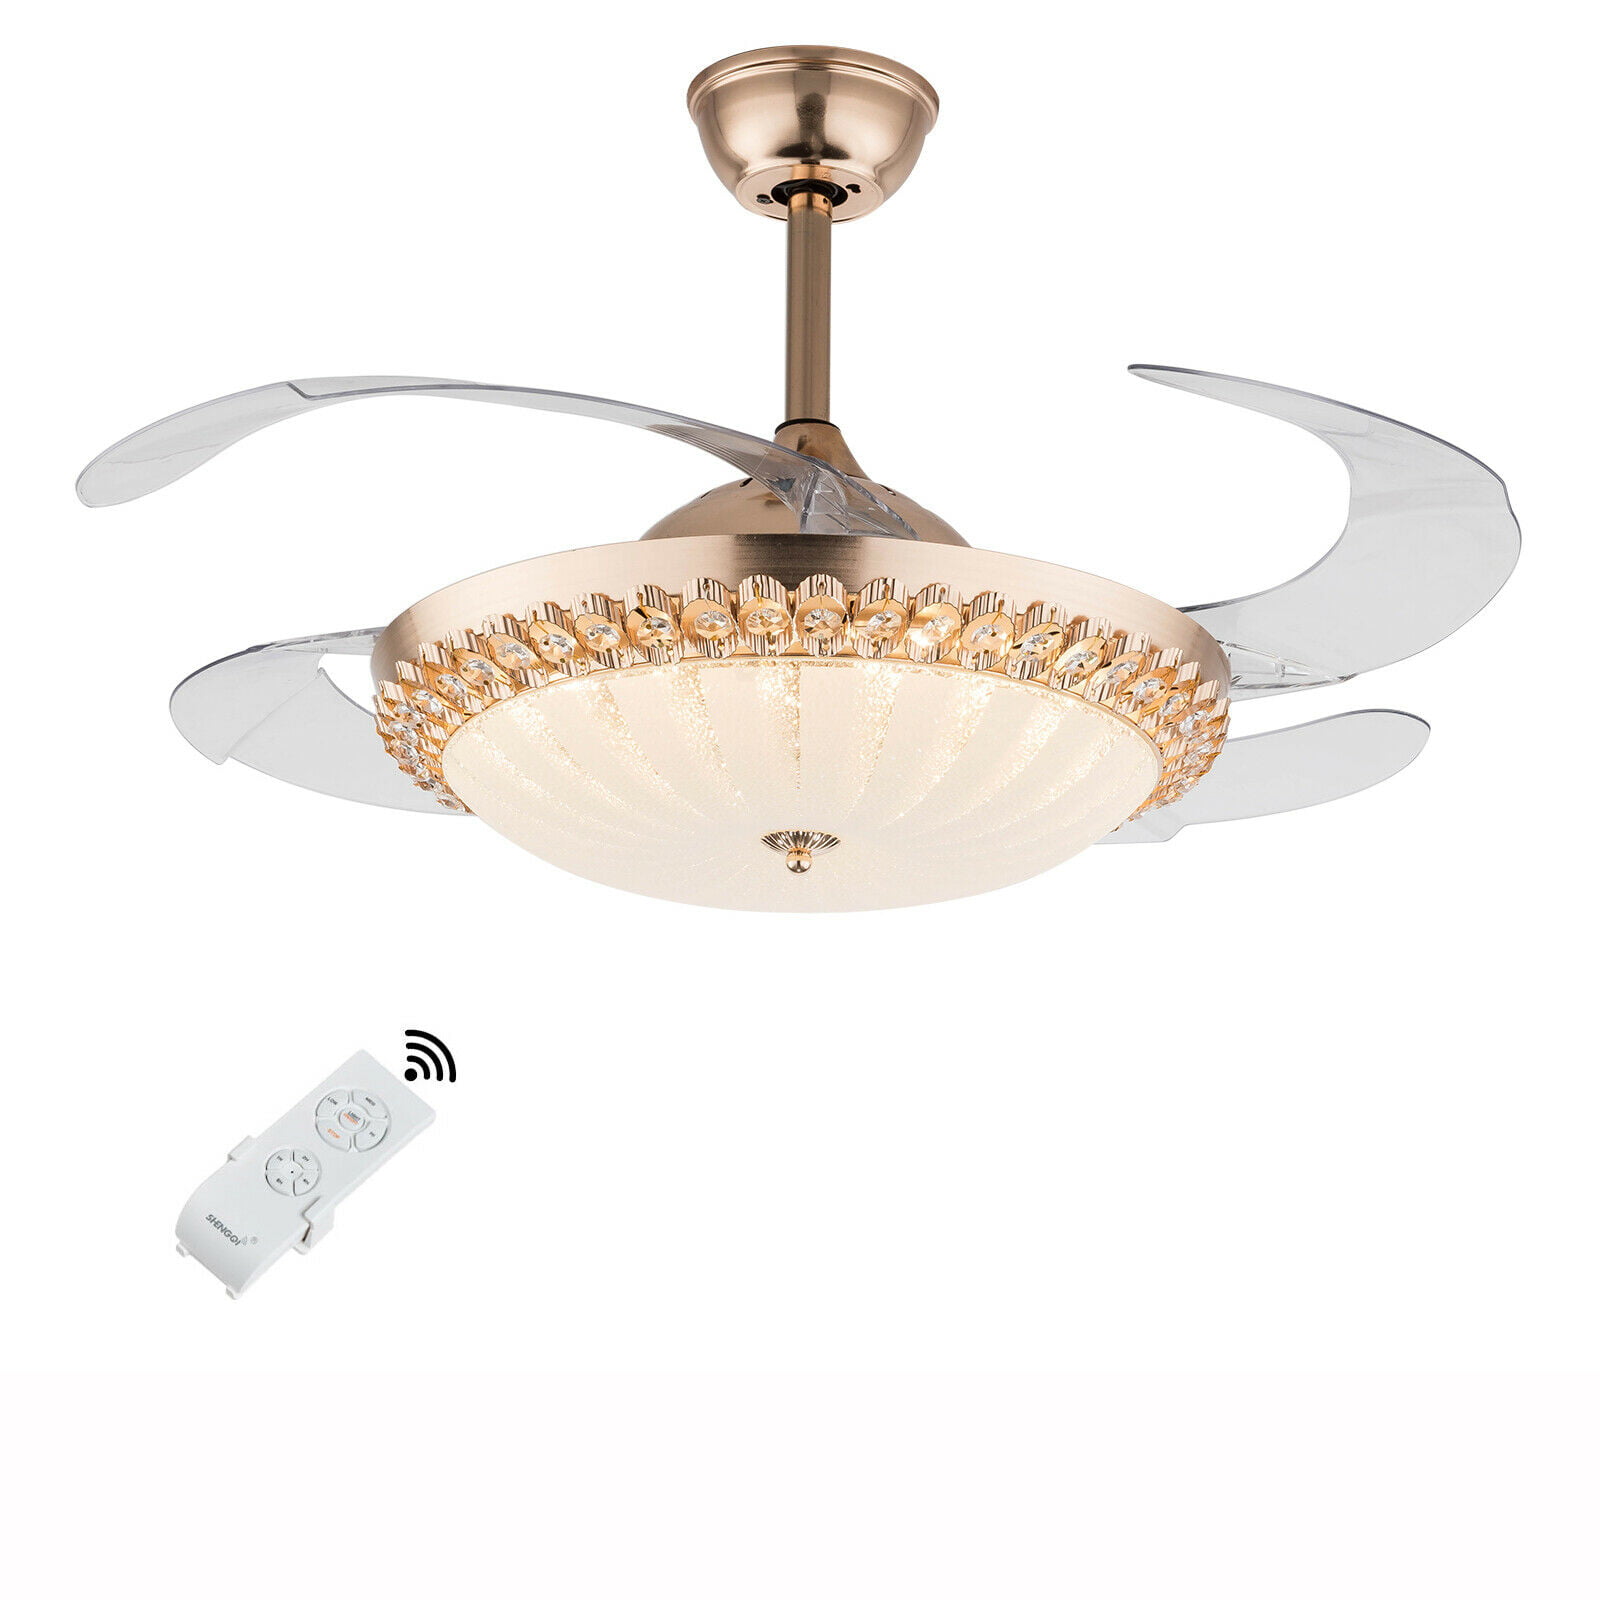 Details about   Crystal Ceiling Fan Light Remote Control Chandelier LED Lamp& Retractable Blades 